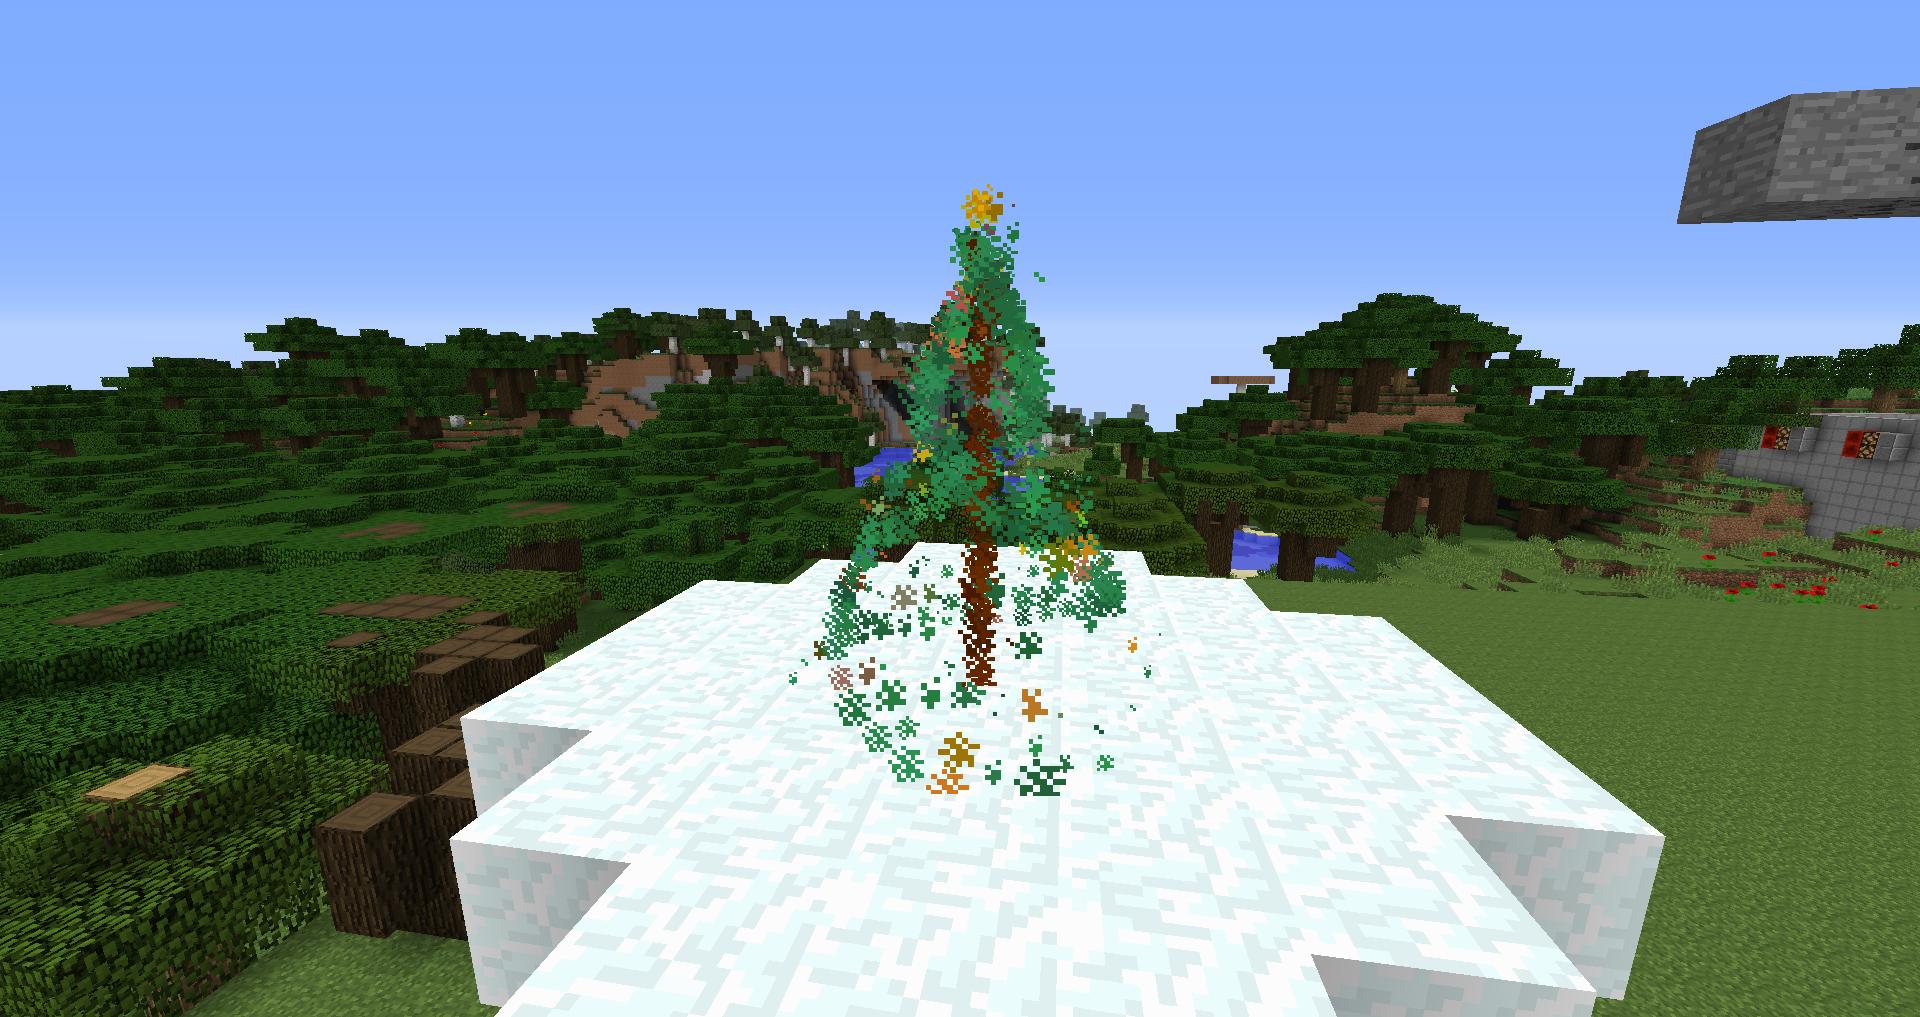 Tutorial Use Particles As A Christmas Tree | SpigotMC - High Performance Minecraft